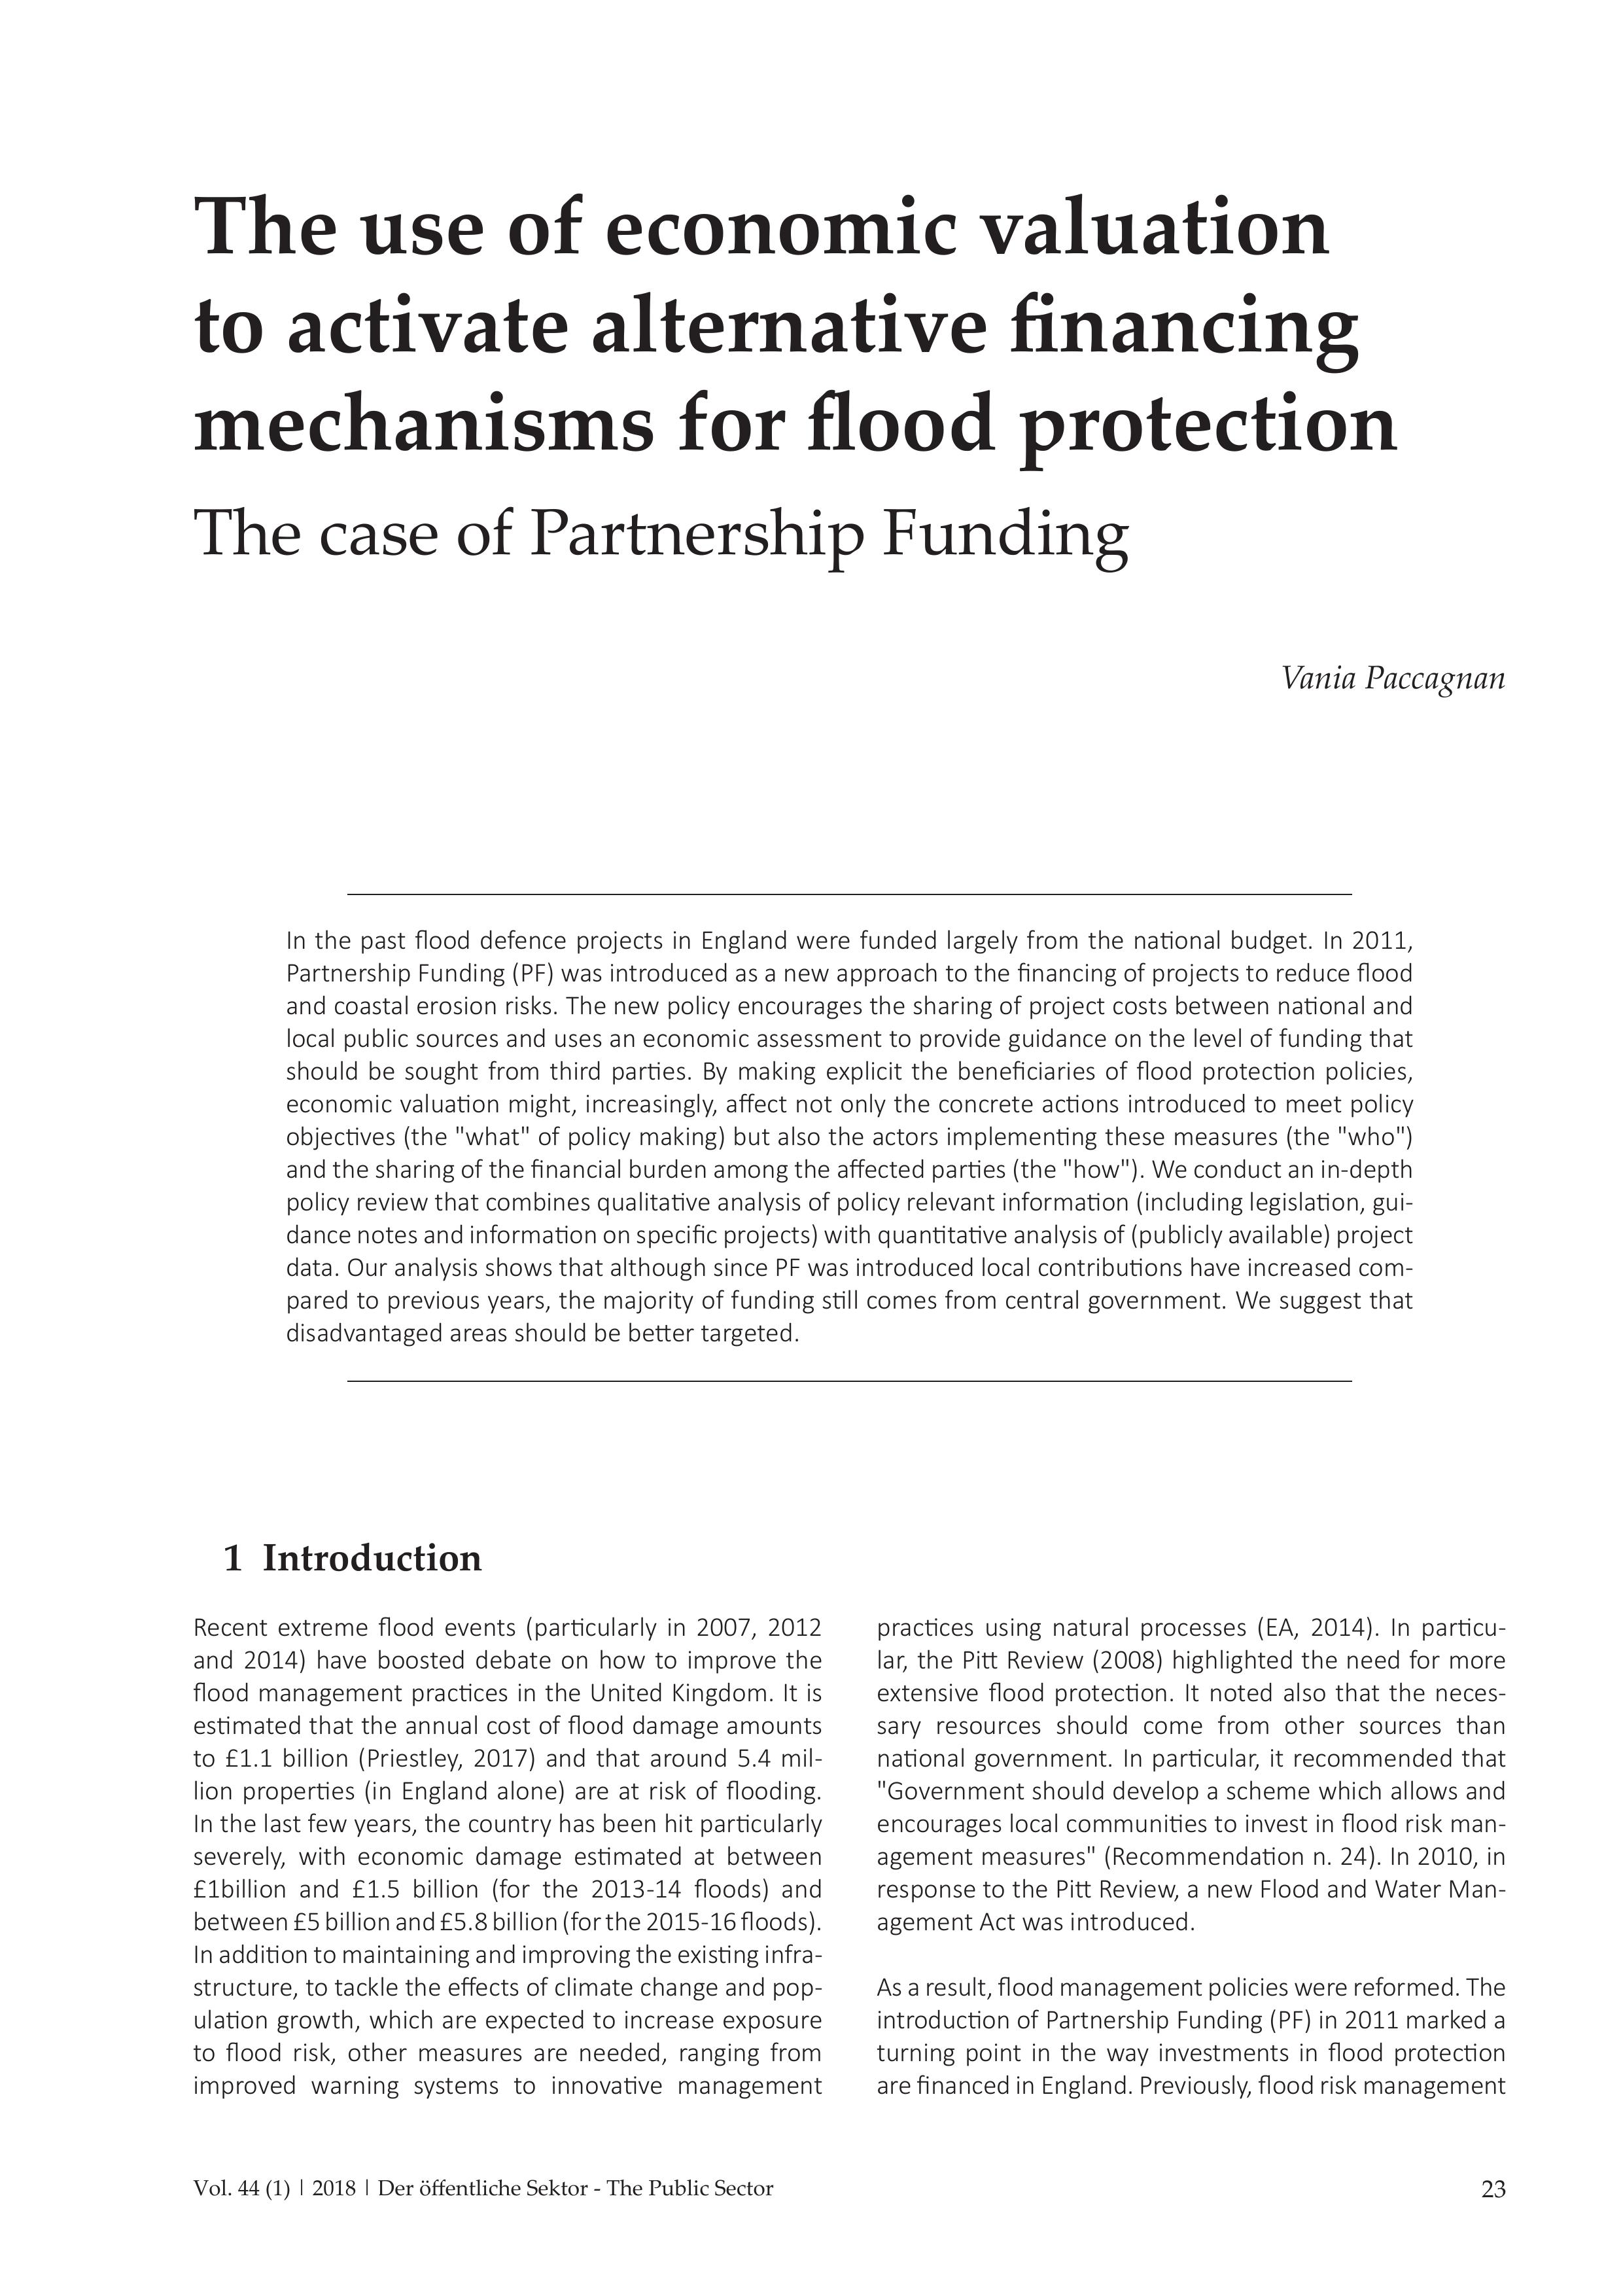 The use of economic valuation to activate alternative financing mechanisms for flood protection